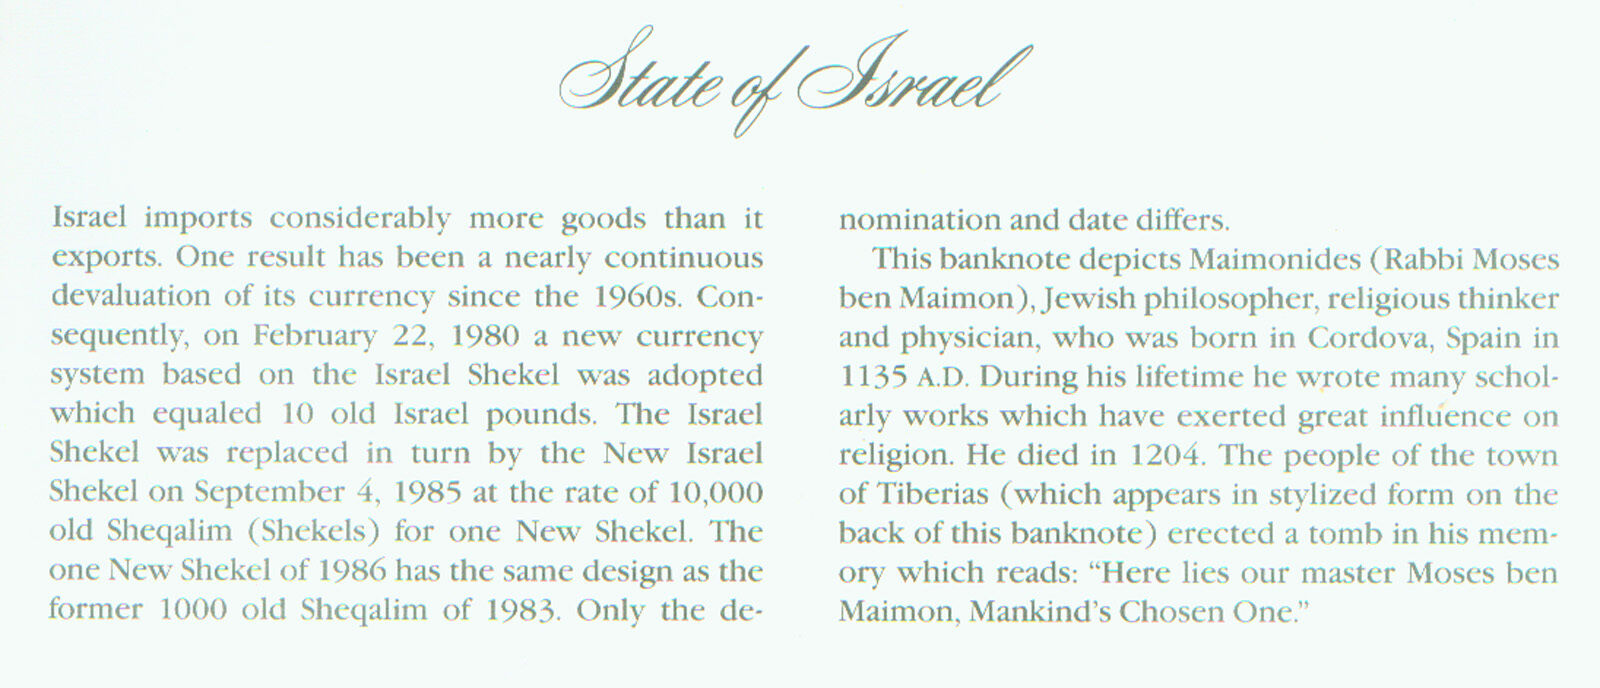 ISRAEL MAIMONIDES P # 51a of 1986 in a STAMPED WINDOWED ENVELOPE with MAP & INFO